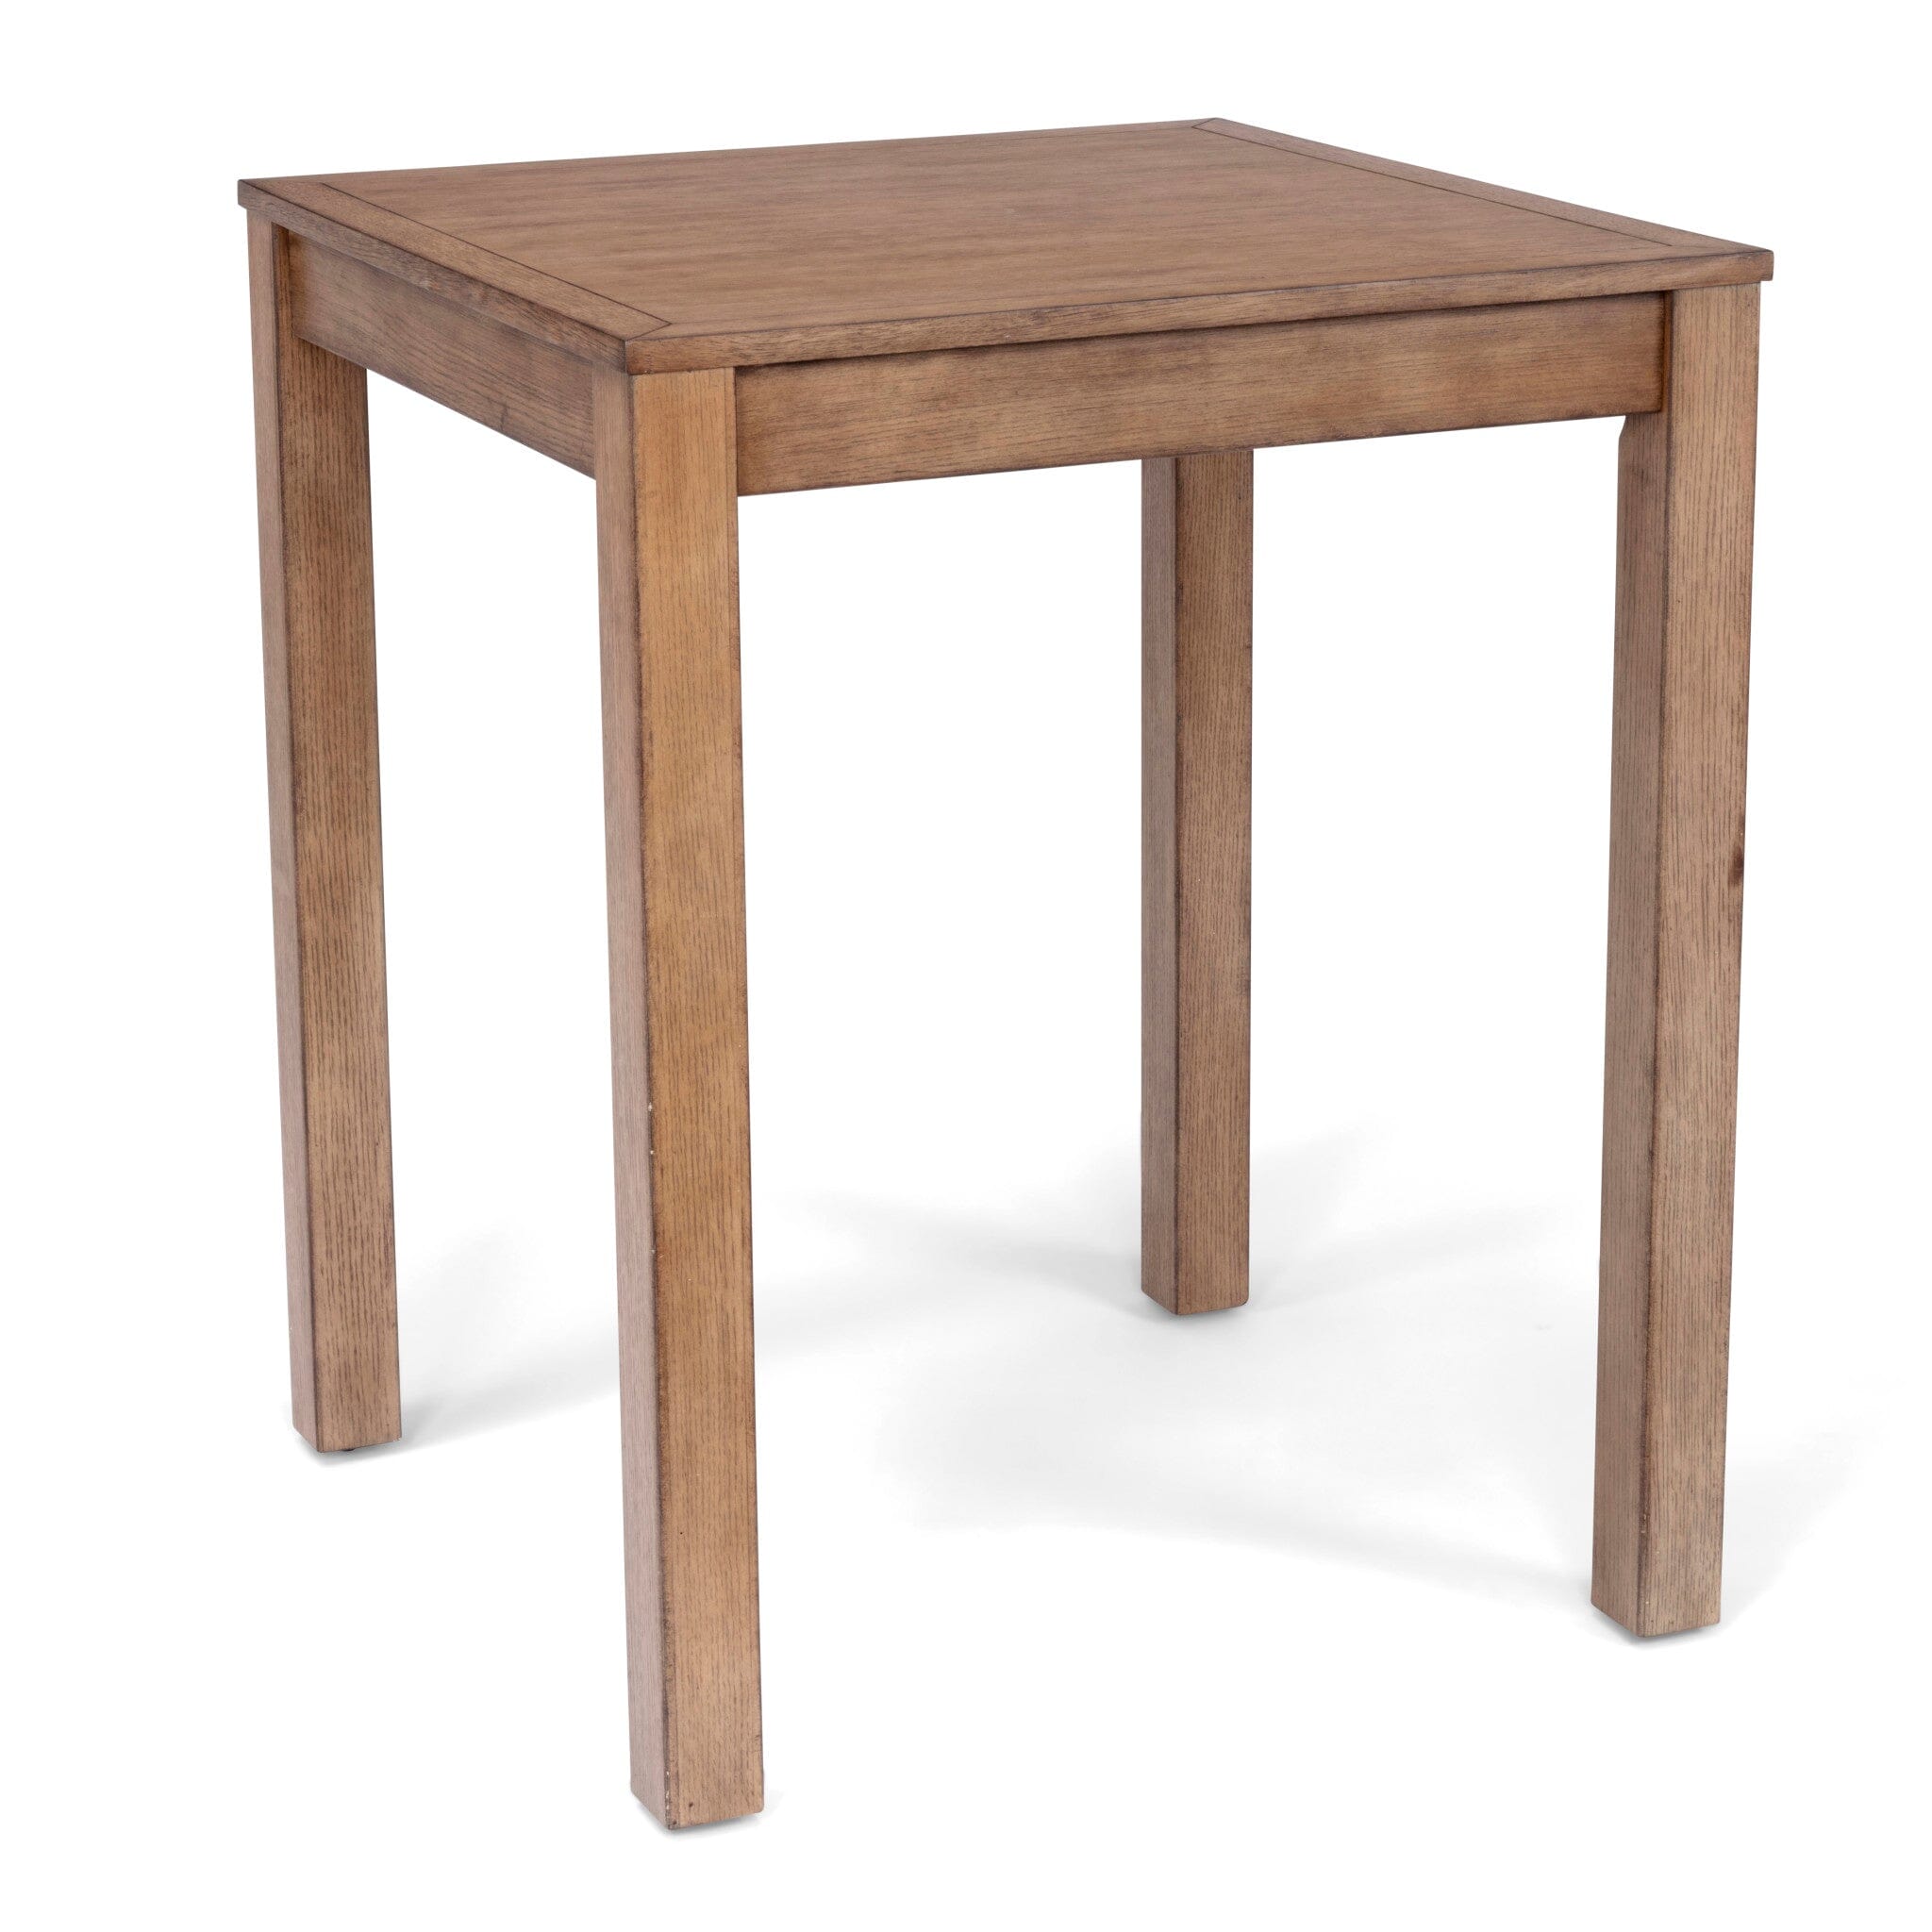 Modern & Contemporary High Table By Big Sur Table Big Sur